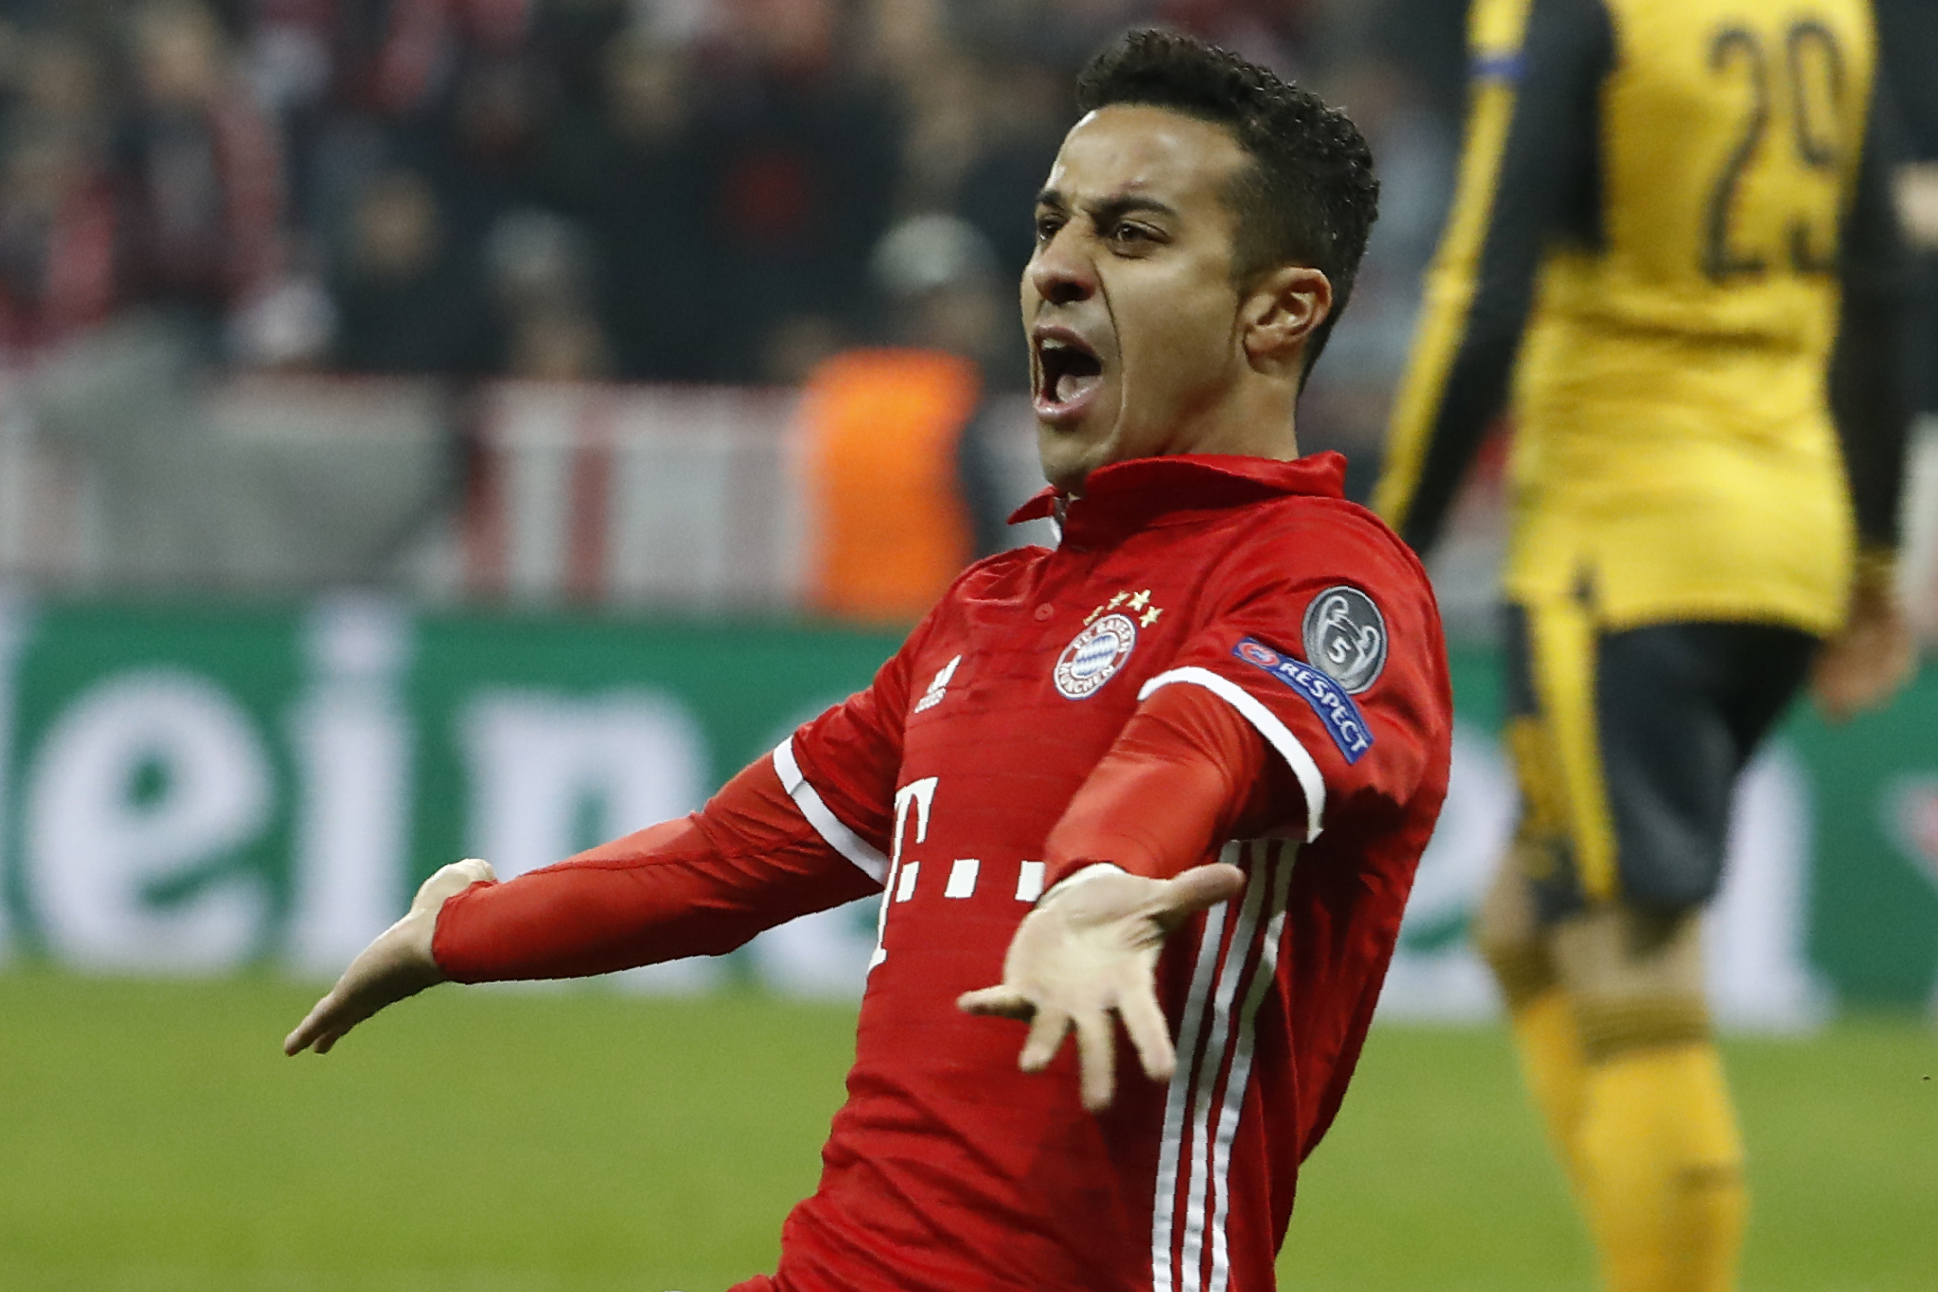 Bayern Munich's Spanish midfielder Thiago Alcantara celebrate scoring during the UEFA Champions League round of sixteen football match between FC Bayern Munich and Arsenal in Munich, southern Germany, on February 15, 2017. 
 / AFP / Odd ANDERSEN        (Photo credit should read ODD ANDERSEN/AFP/Getty Images)